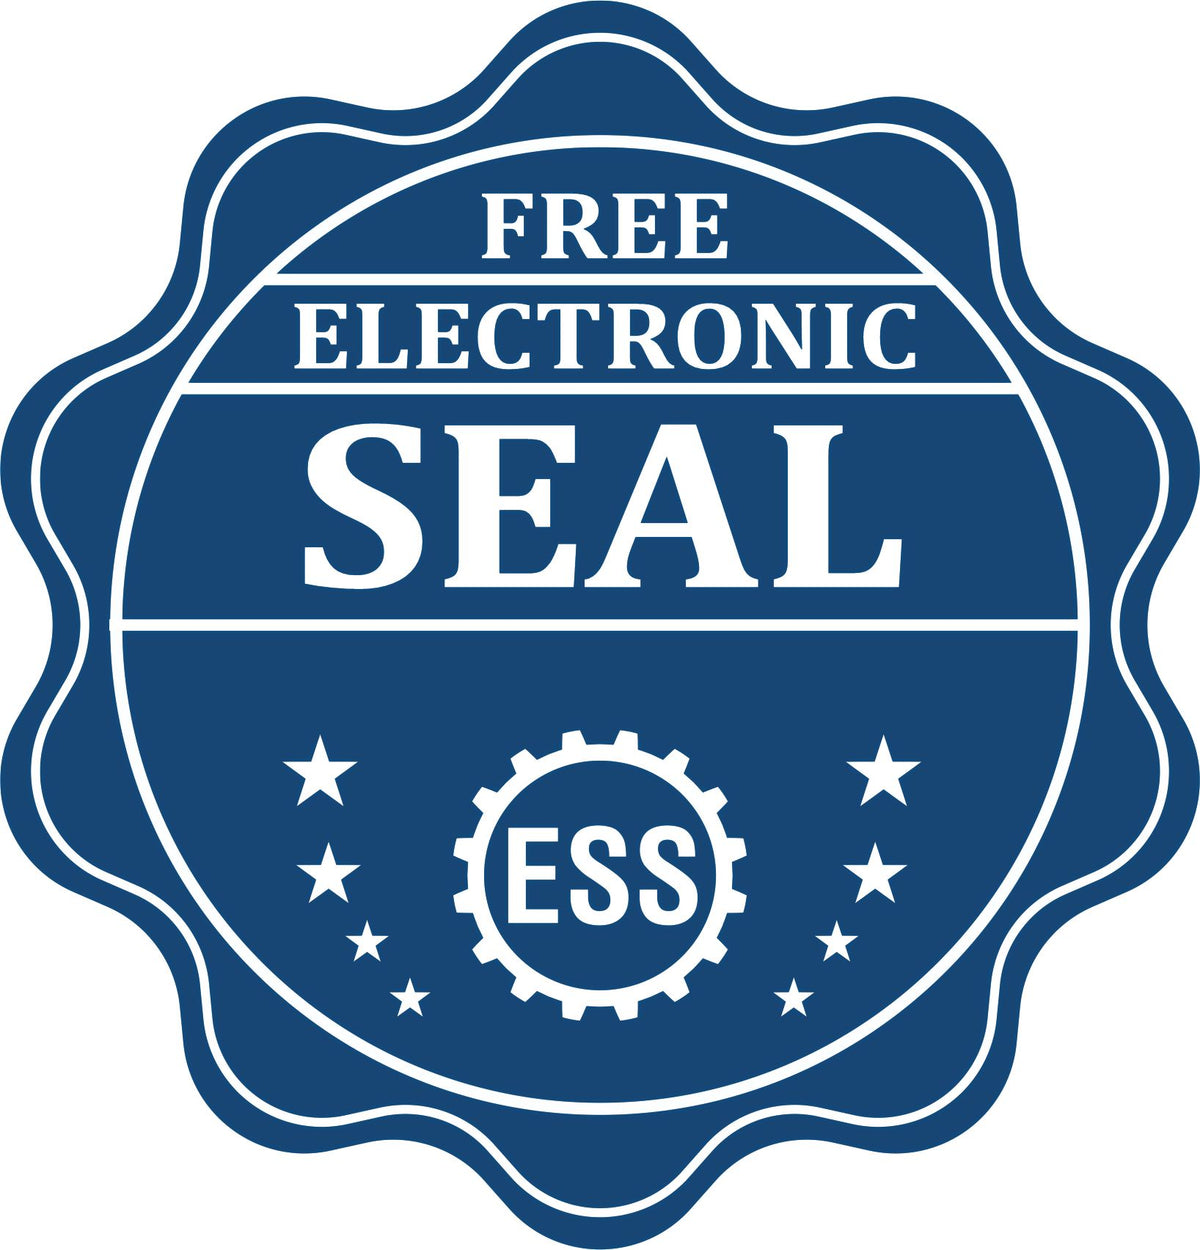 A badge showing a free electronic seal for the State of Nevada Soft Land Surveyor Embossing Seal with stars and the ESS gear on the emblem.